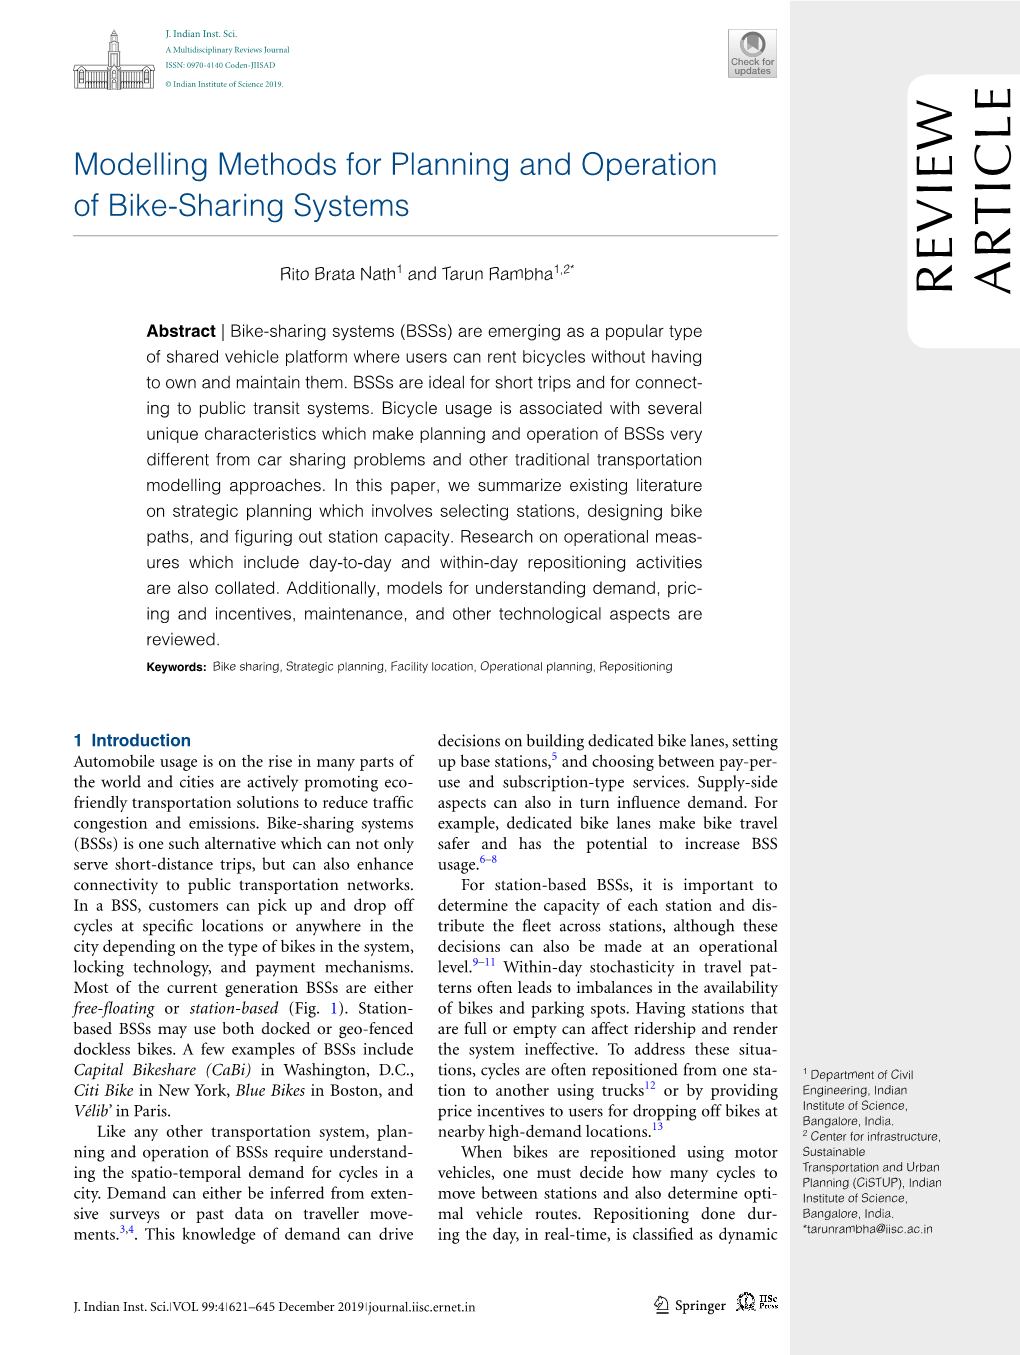 Modelling Methods for Planning and Operation of Bike-Sharing Systems